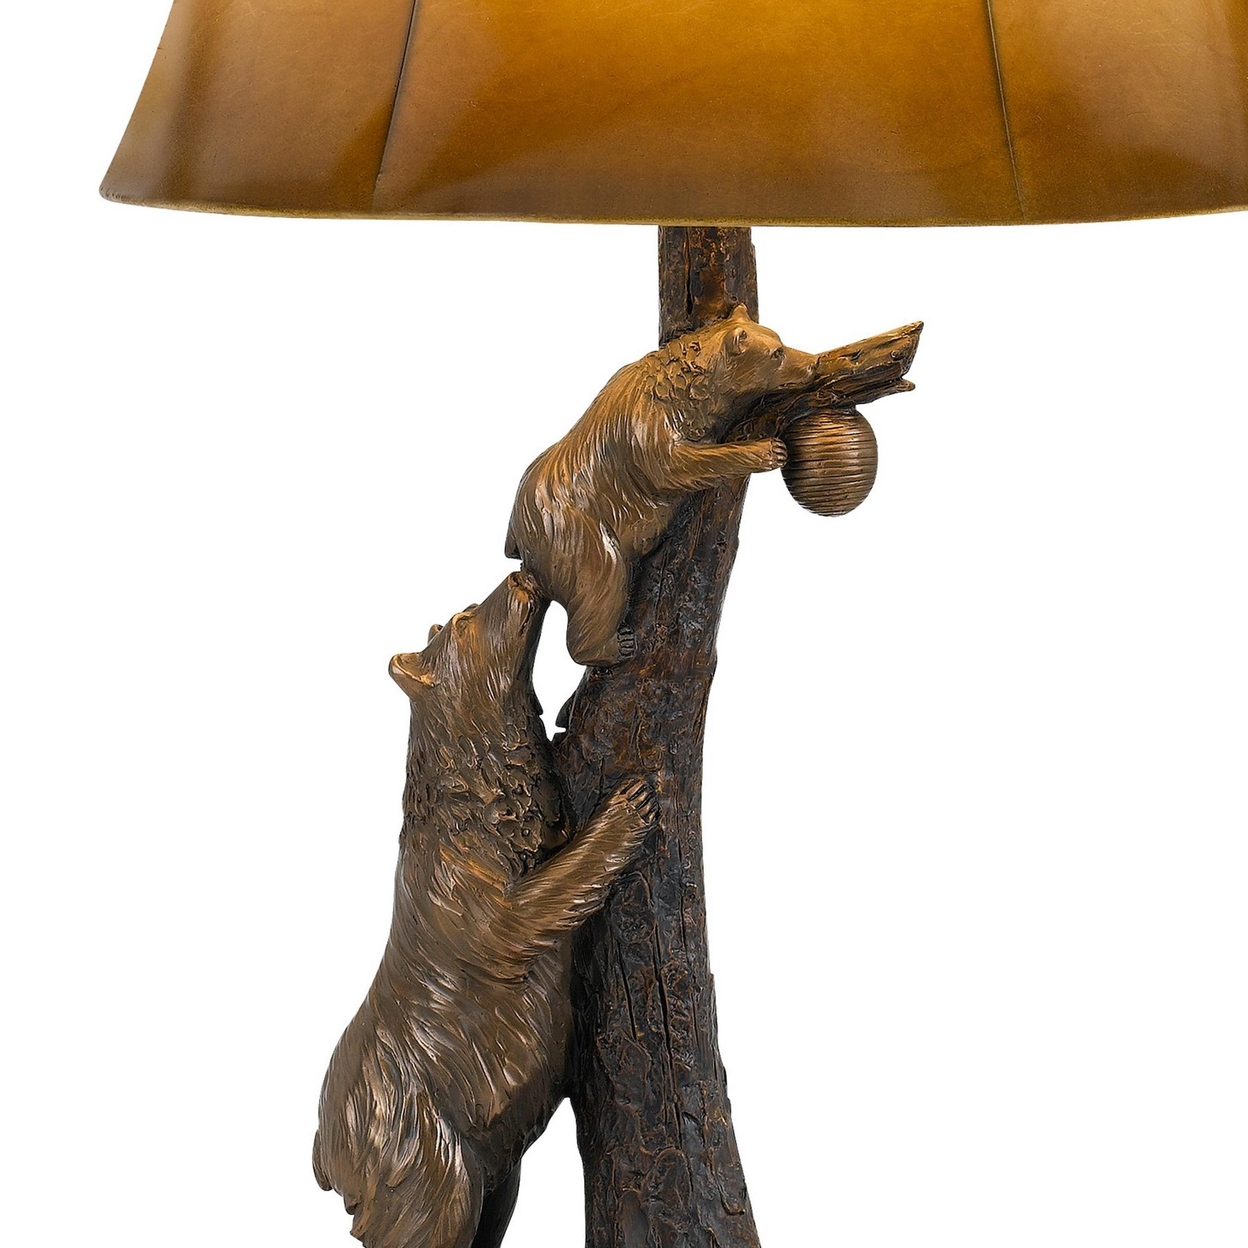 3 Way Resin Body Table Lamp With Bear And Tree Design, Brown And Gold- Saltoro Sherpi